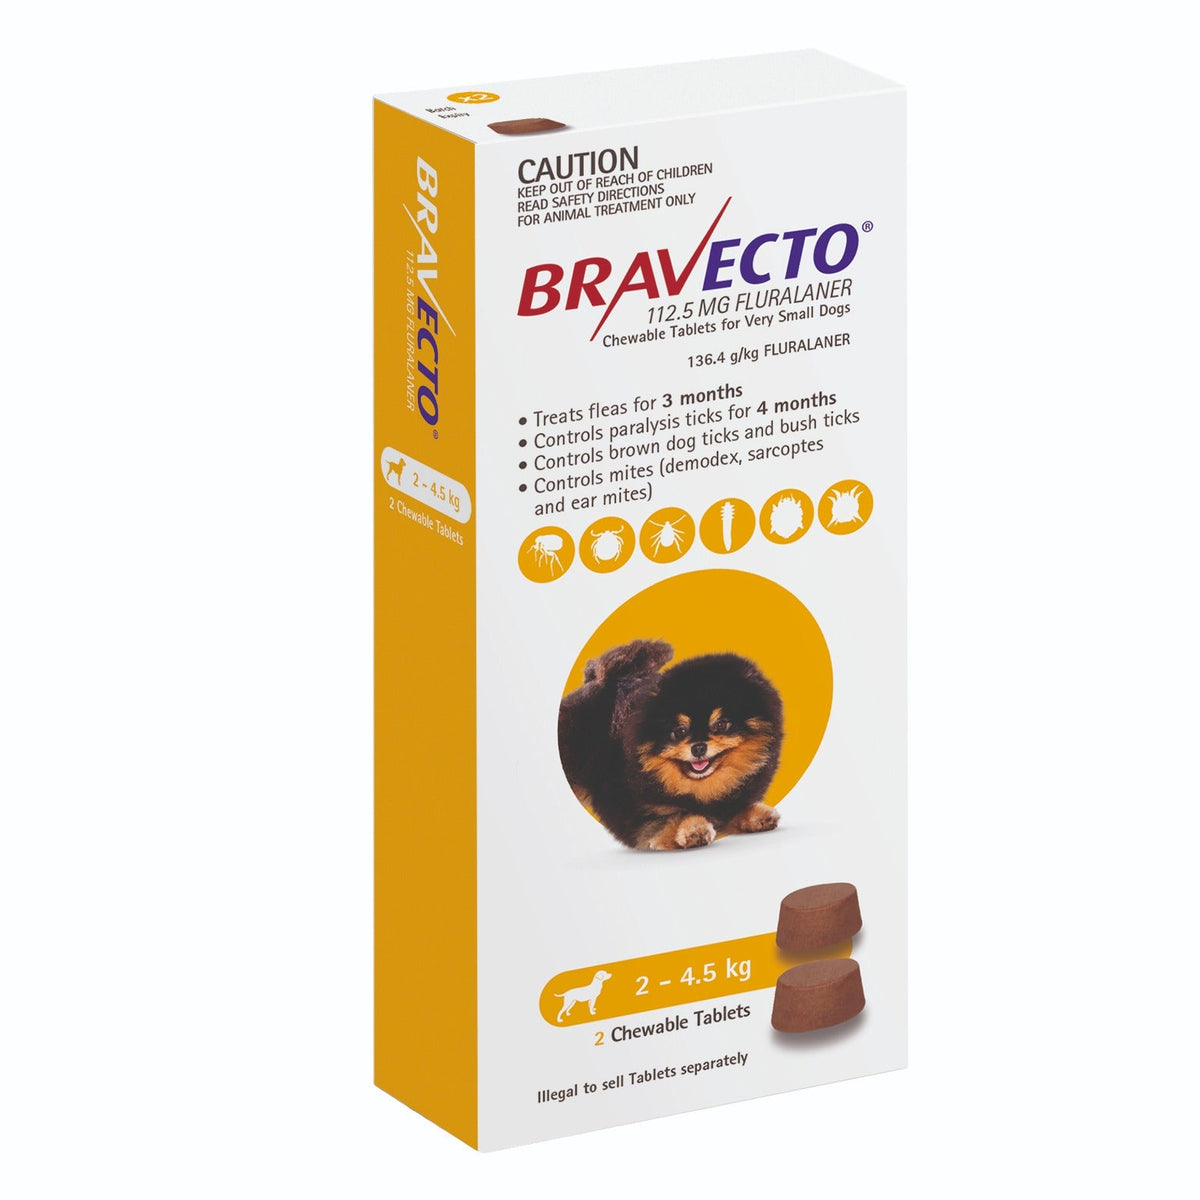 Bravecto 3-Month Chews for Very Small Dogs 2-4.5kg (Yellow) - 2 x 2 Chew Value Bundle